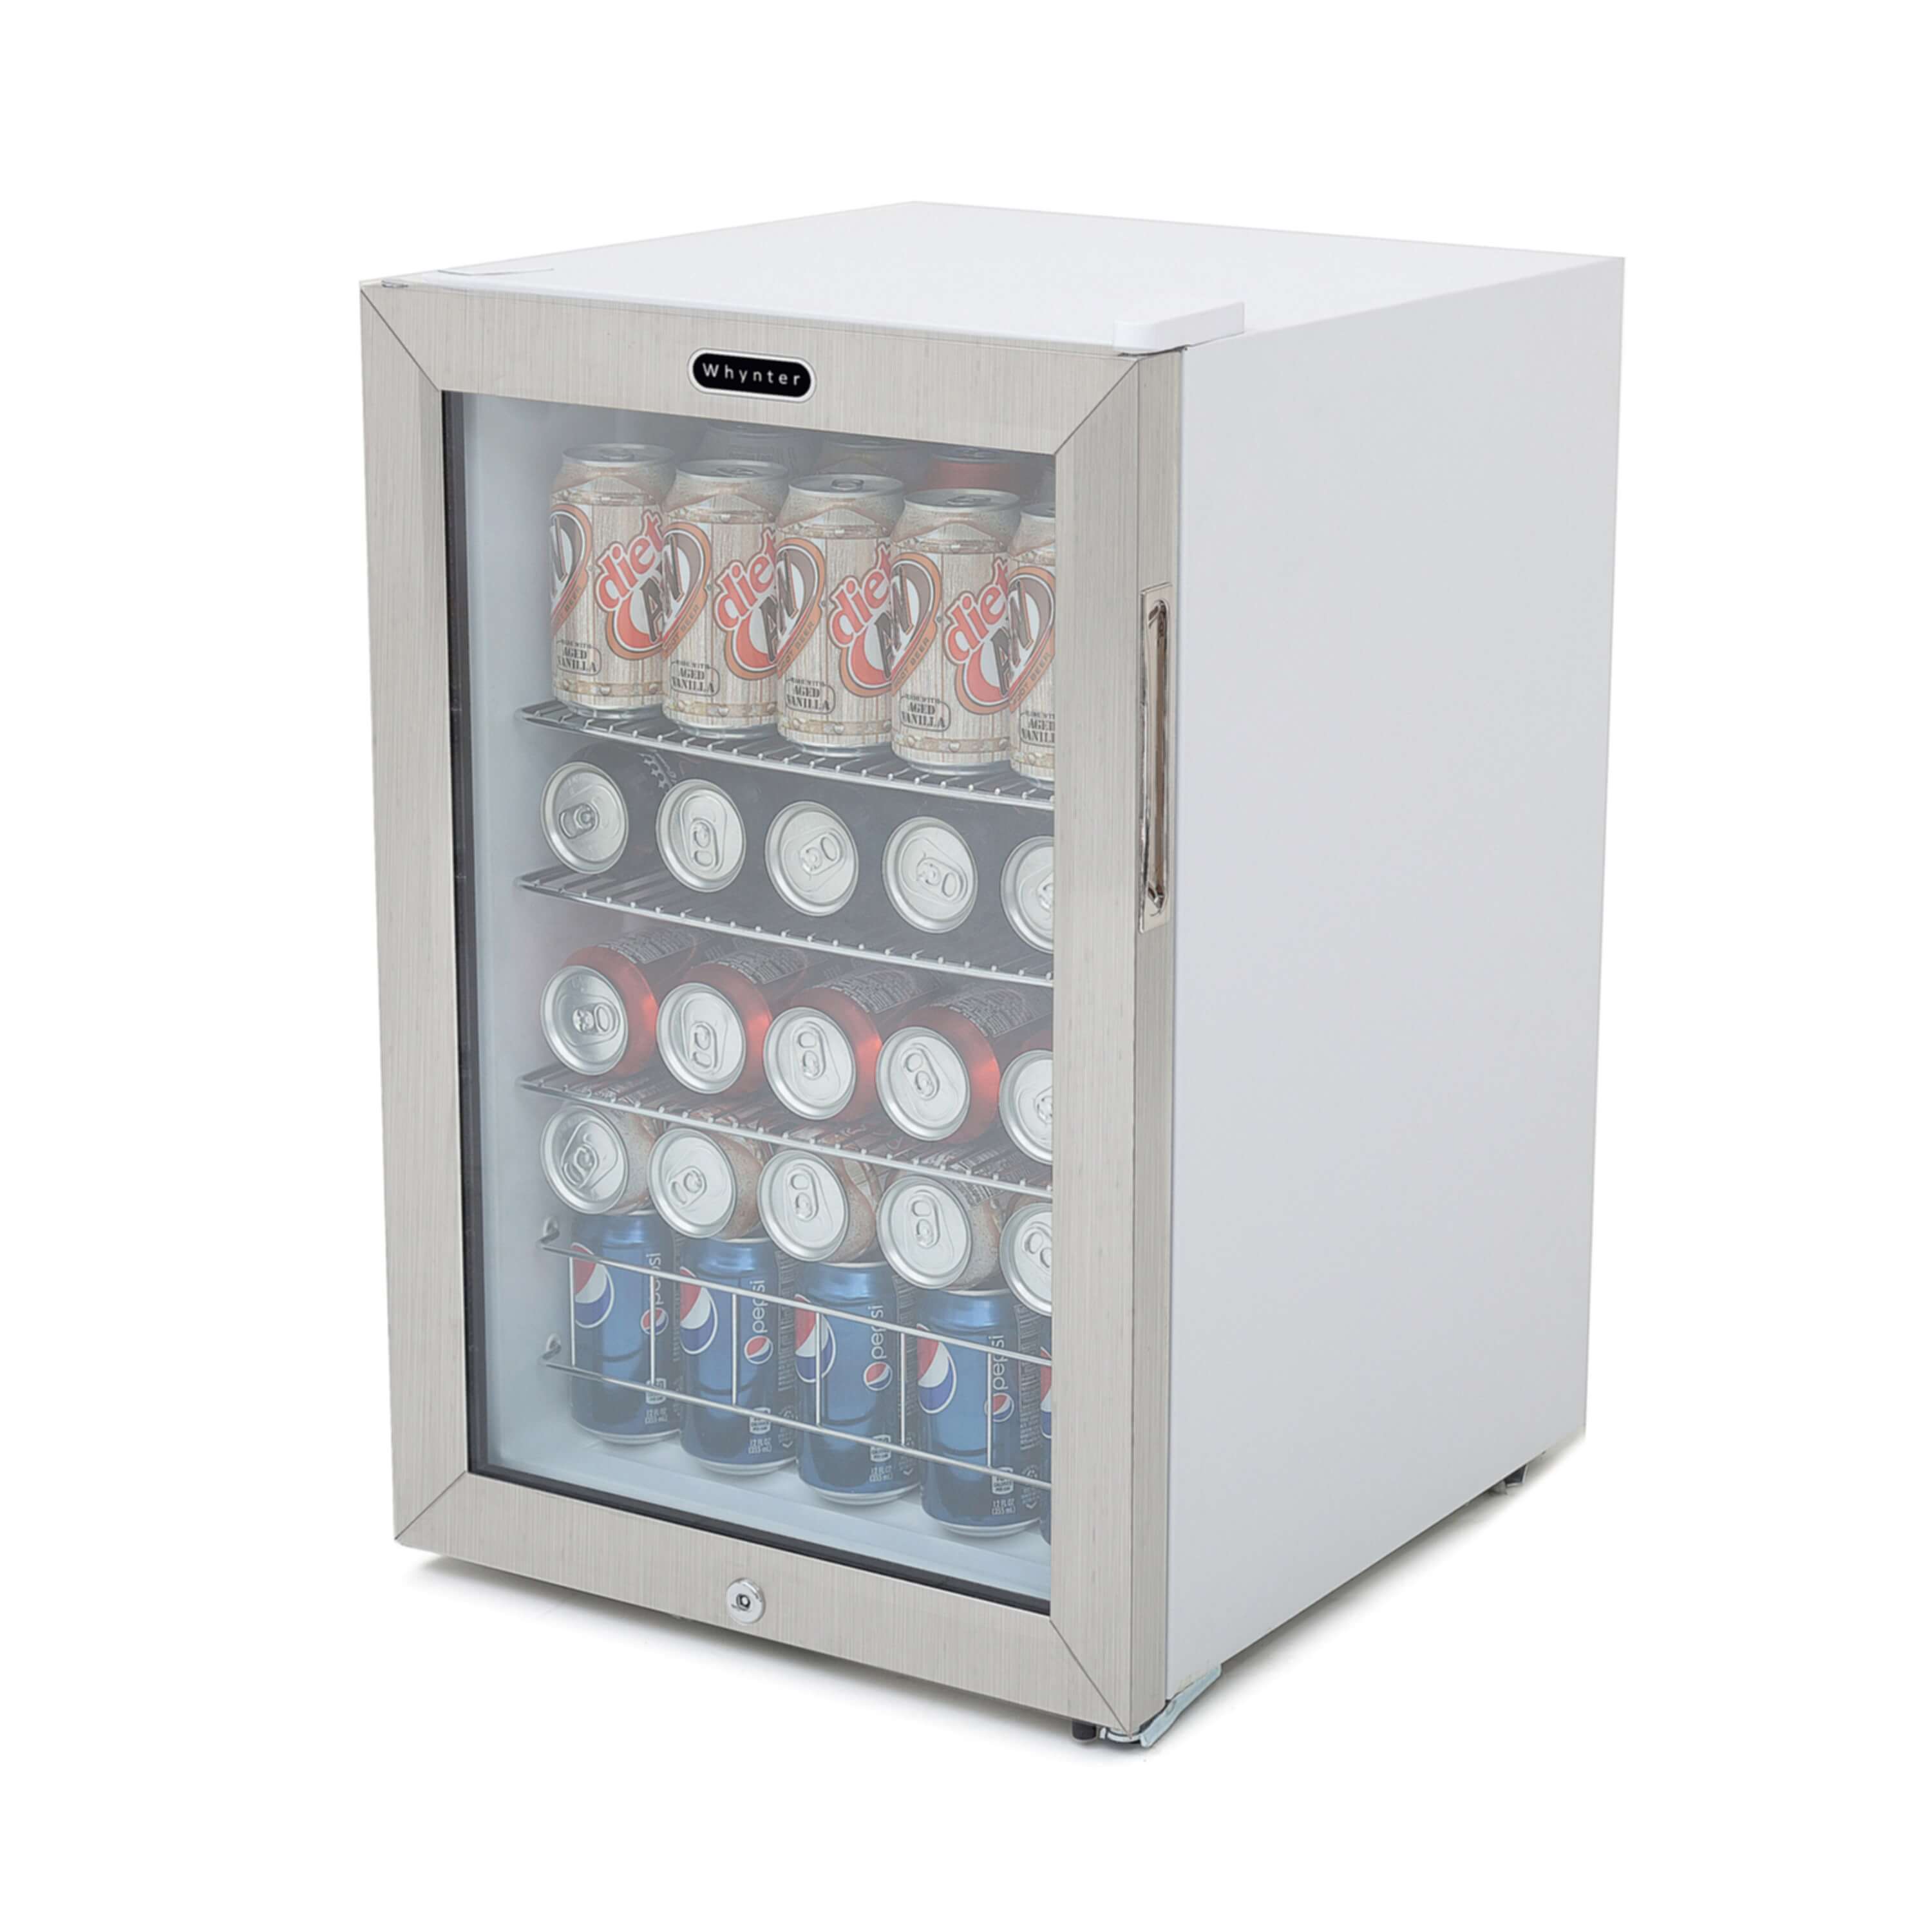 Whynter - Beverage Refrigerator With Lock - Stainless Steel 90 Can Capacity | BR-091WS